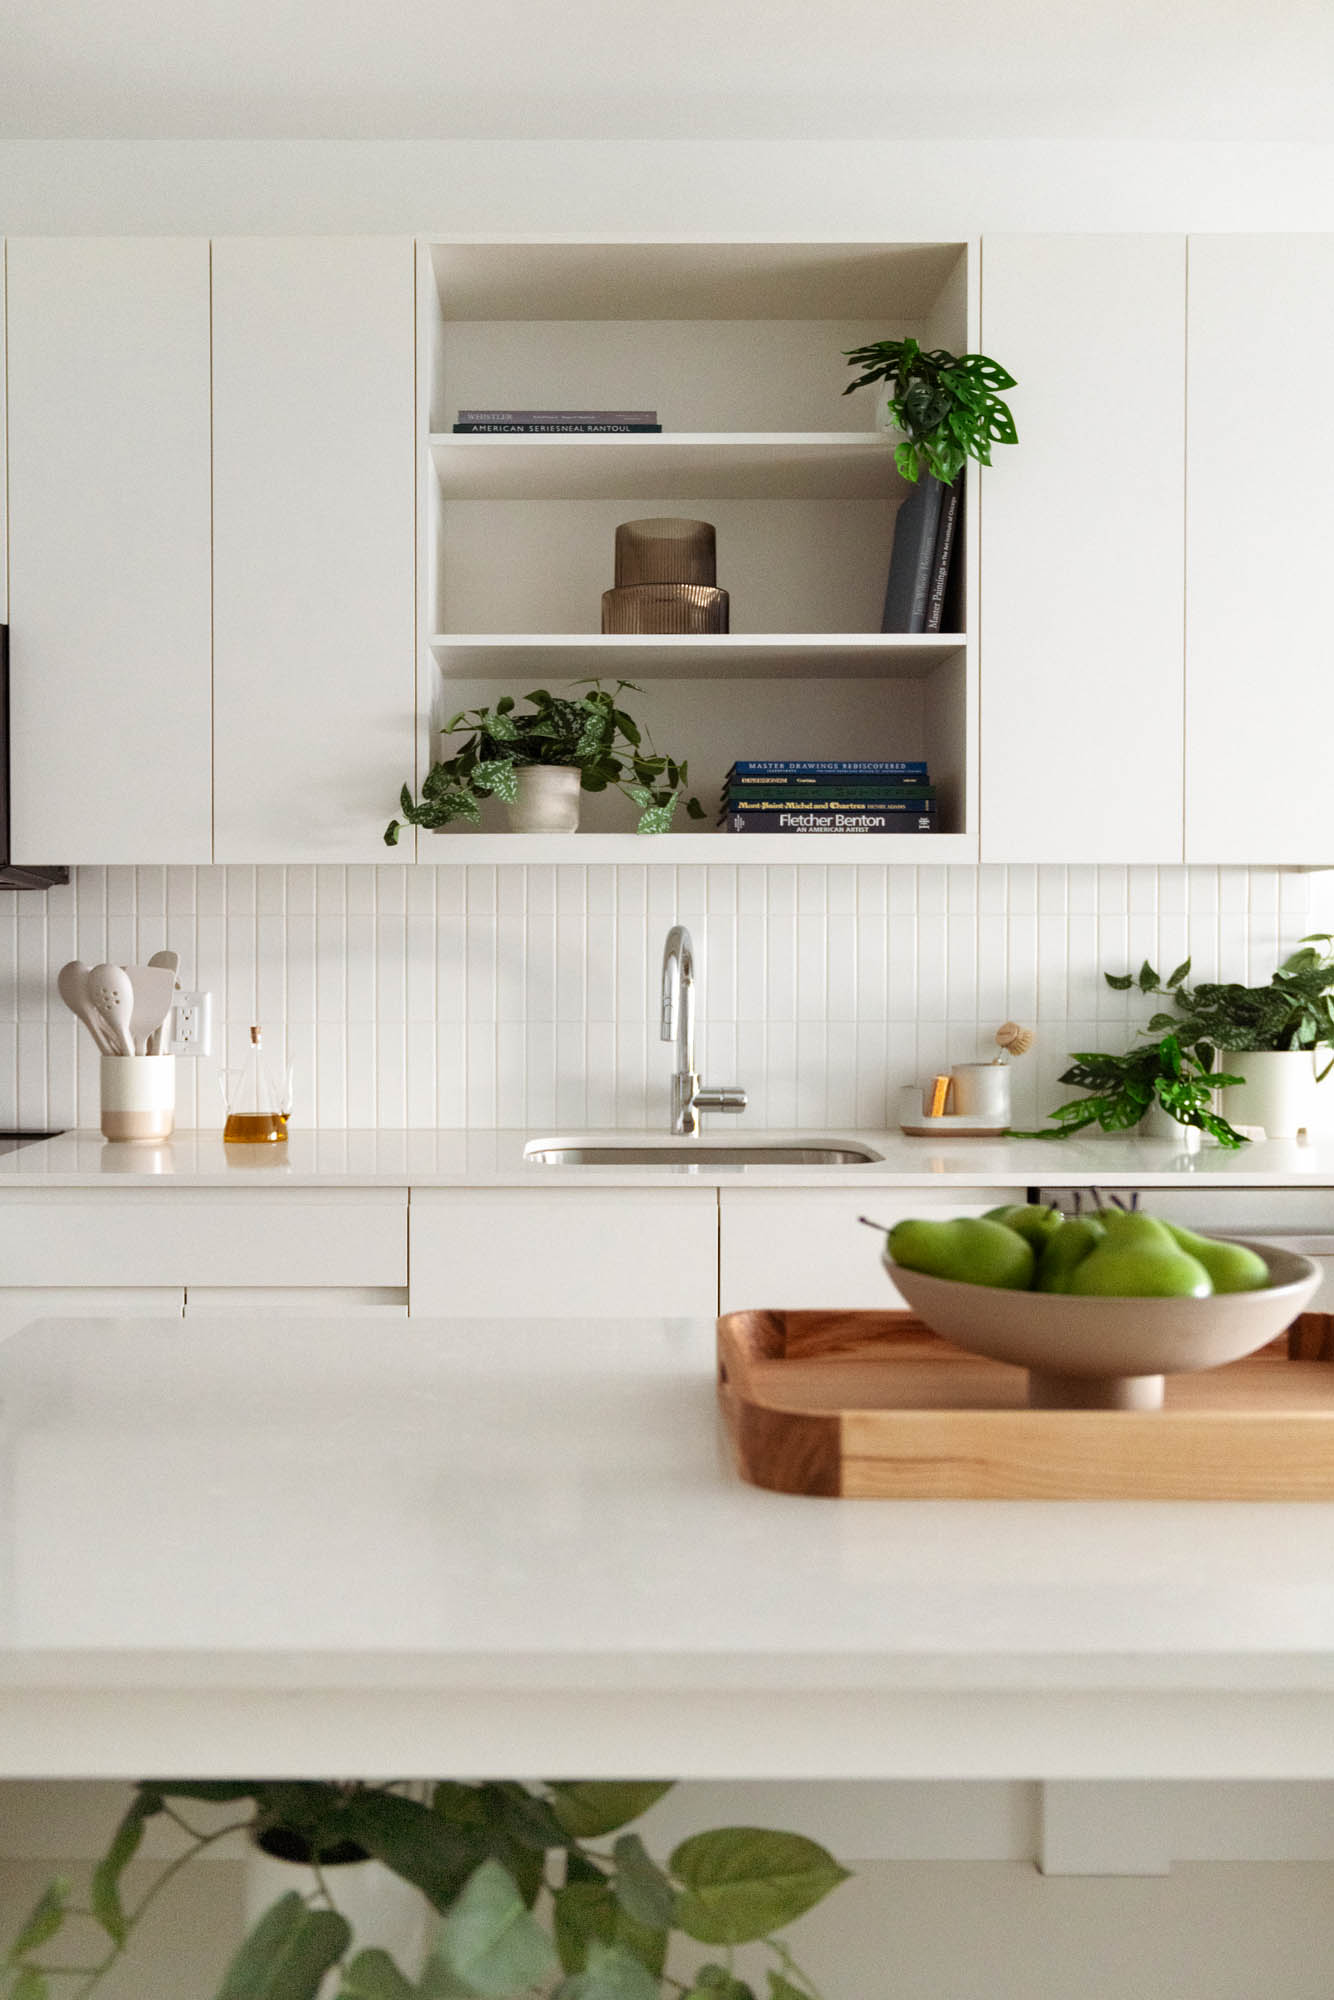 An off white kitchen with with cabinet and shelf space, an island, a sink and green decor